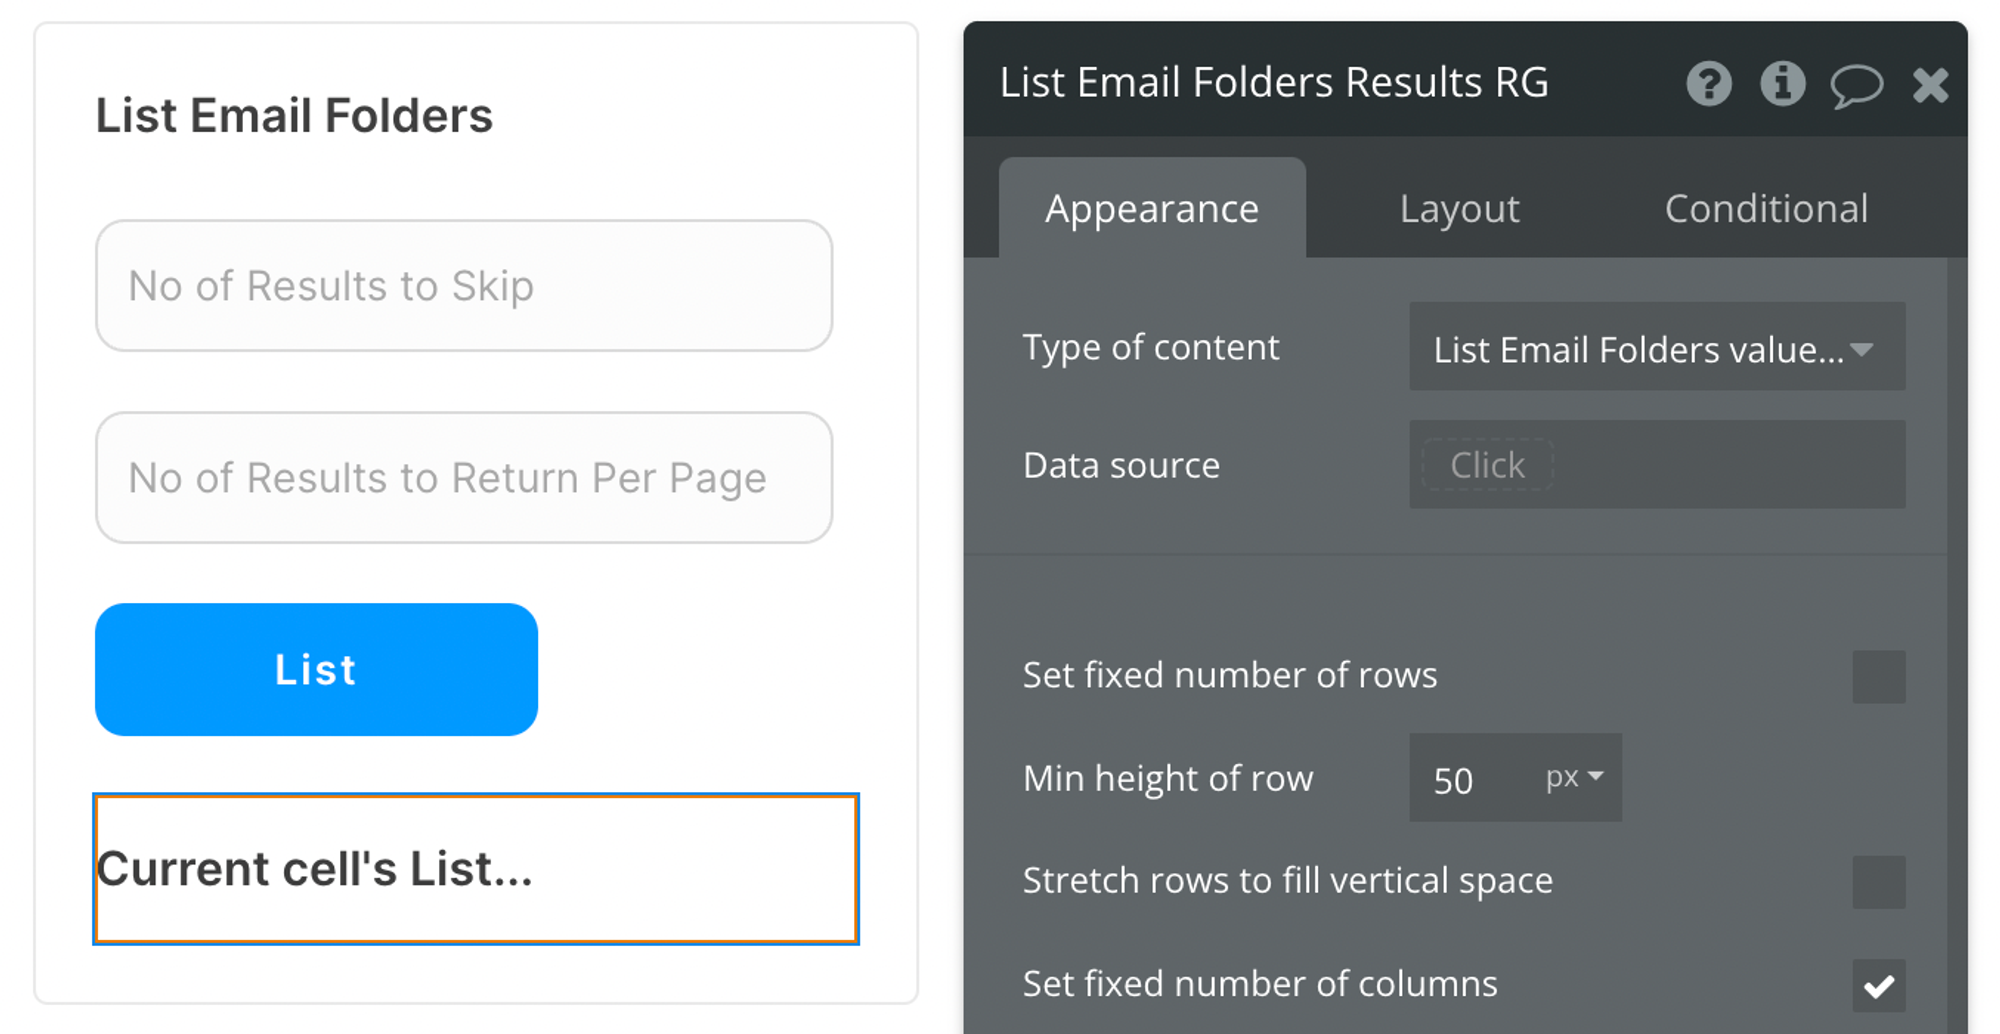 Select List Email Folders value (Outlook) from the list of content types